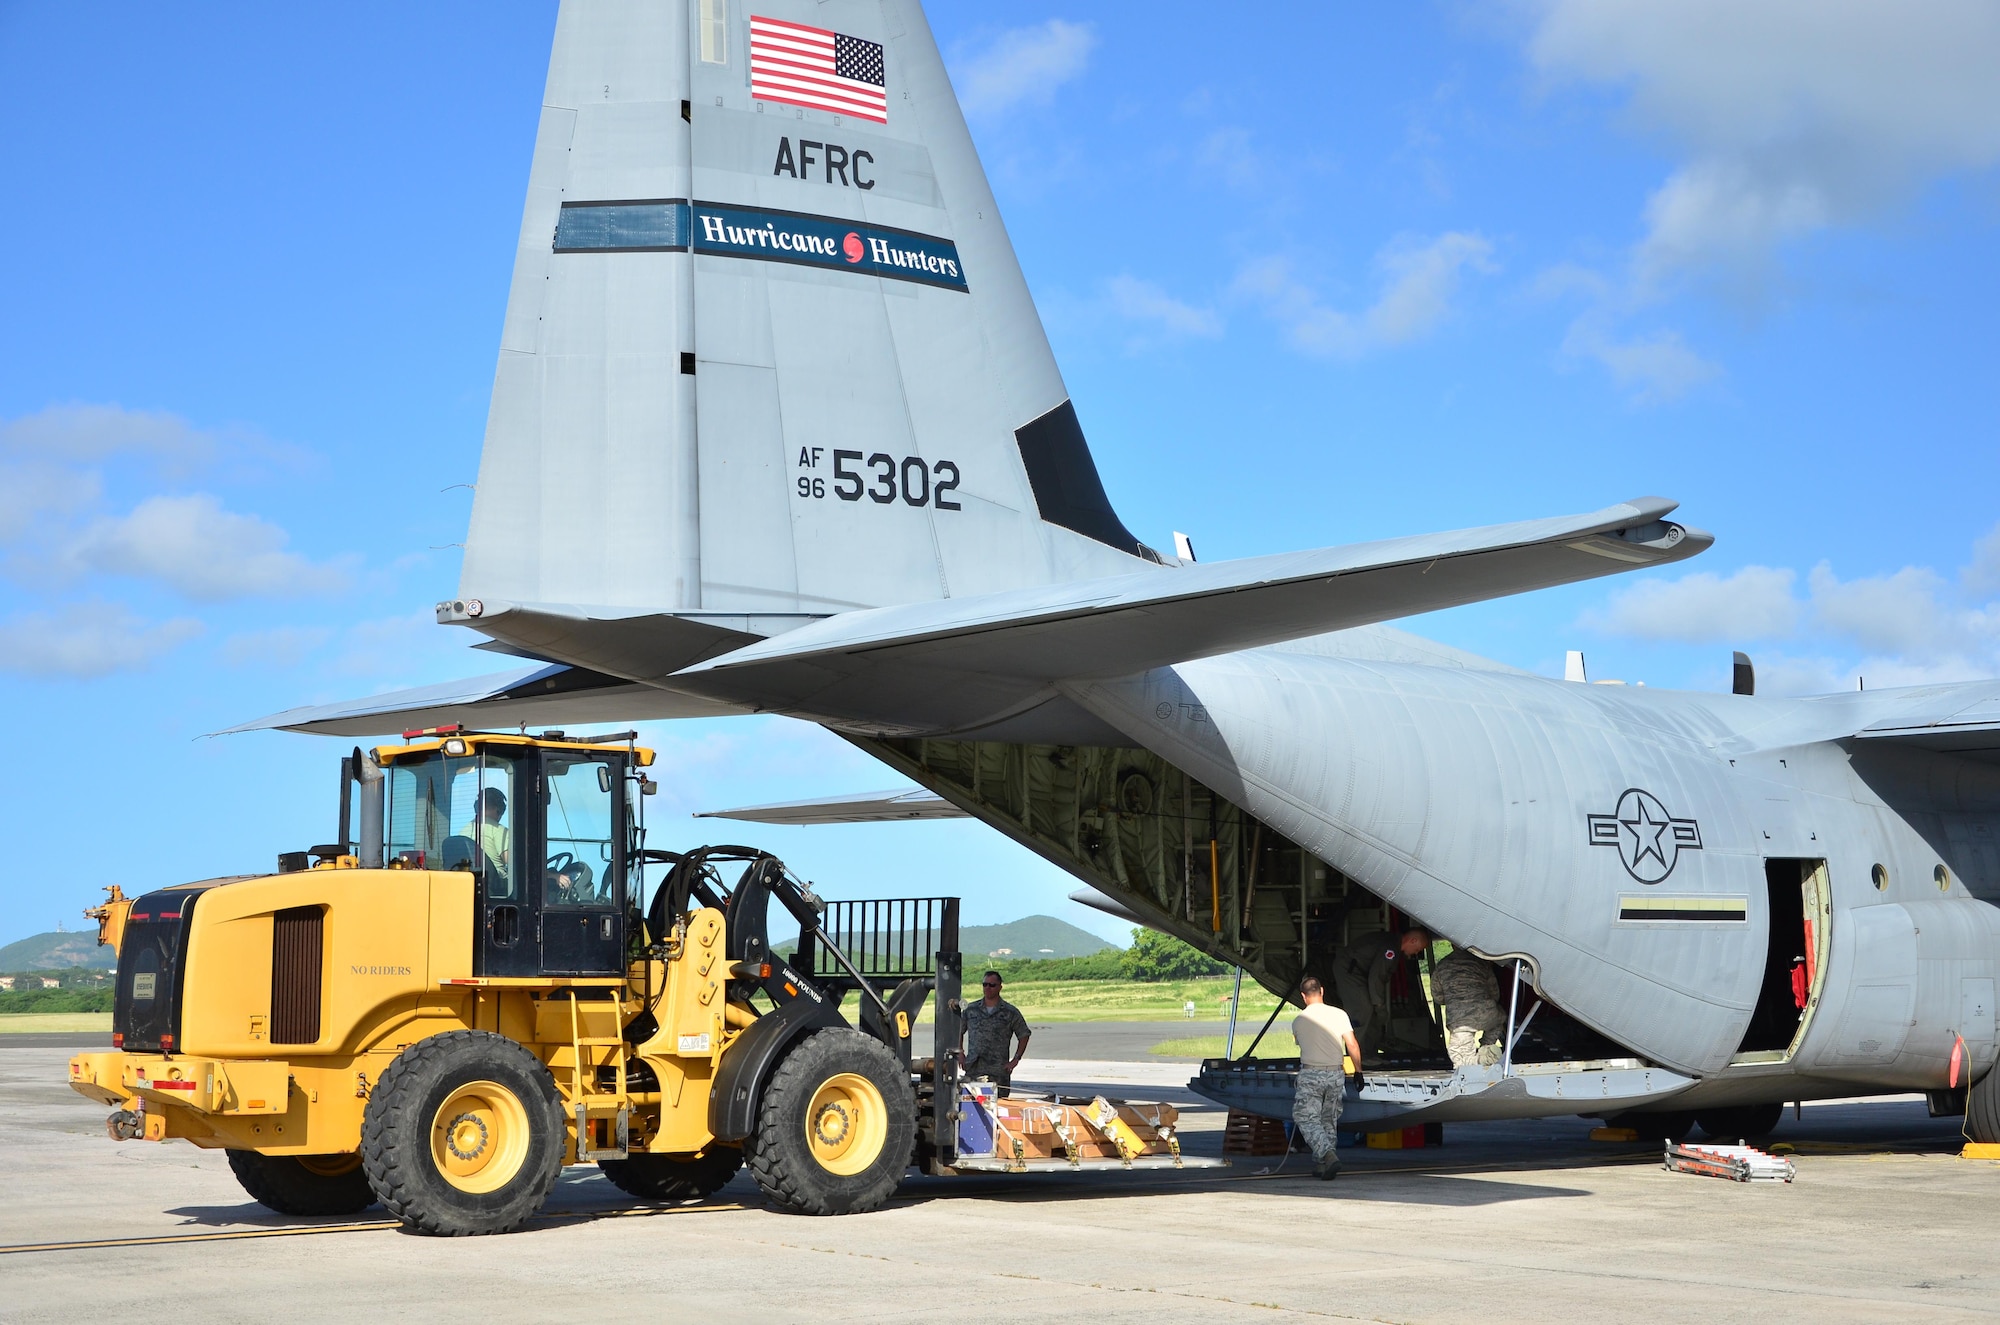 Reservists from the 403rd Wing unload a pallet off a WC-130J at Henry E. Rohlsen Airport, St. Croix, U.S. Virgin Islands, Dec. 12, 2013 during Roll Up. This mission officially closes the 2013 Atlantic Hurricane Hunting operations for the 53rd Weather Reconnaissance Squadron. 